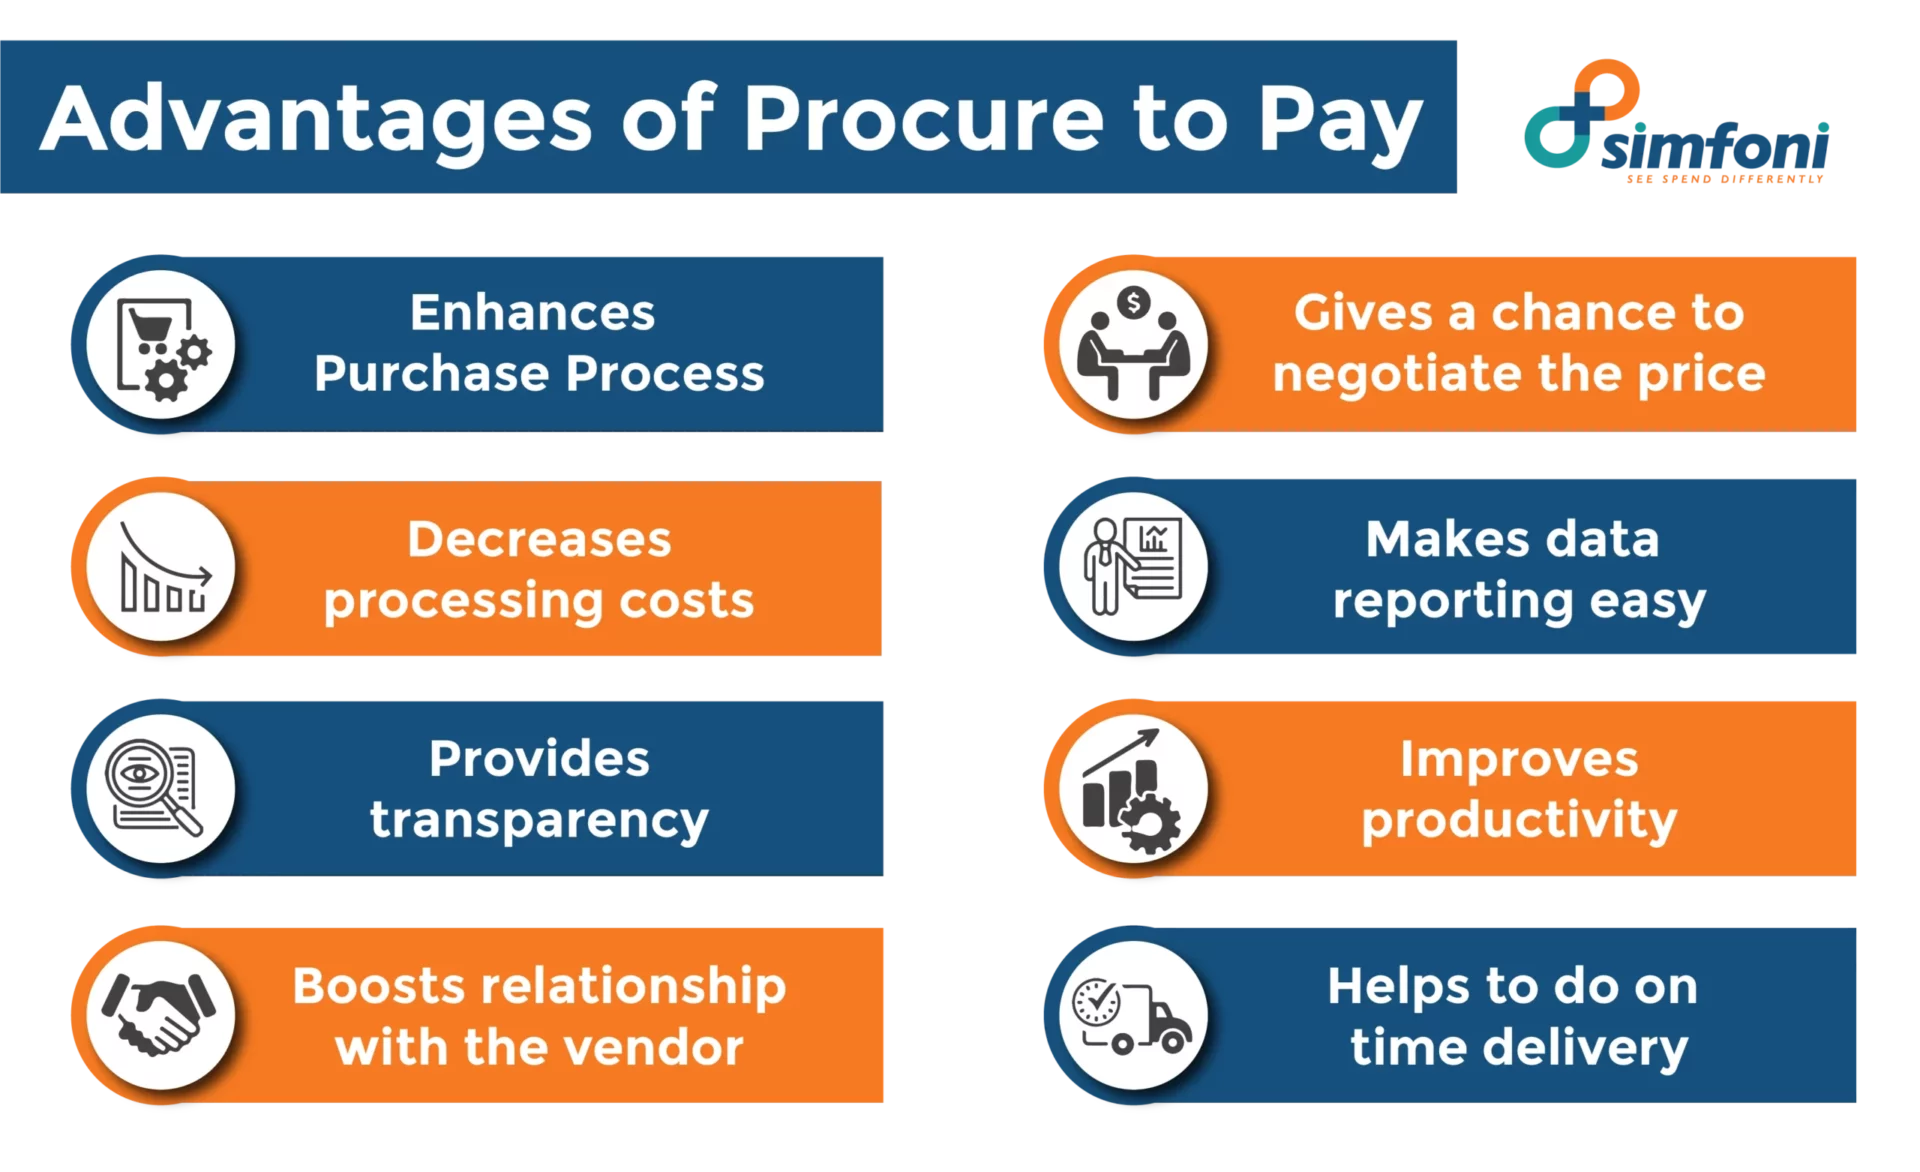 Advantages of Procure to Pay